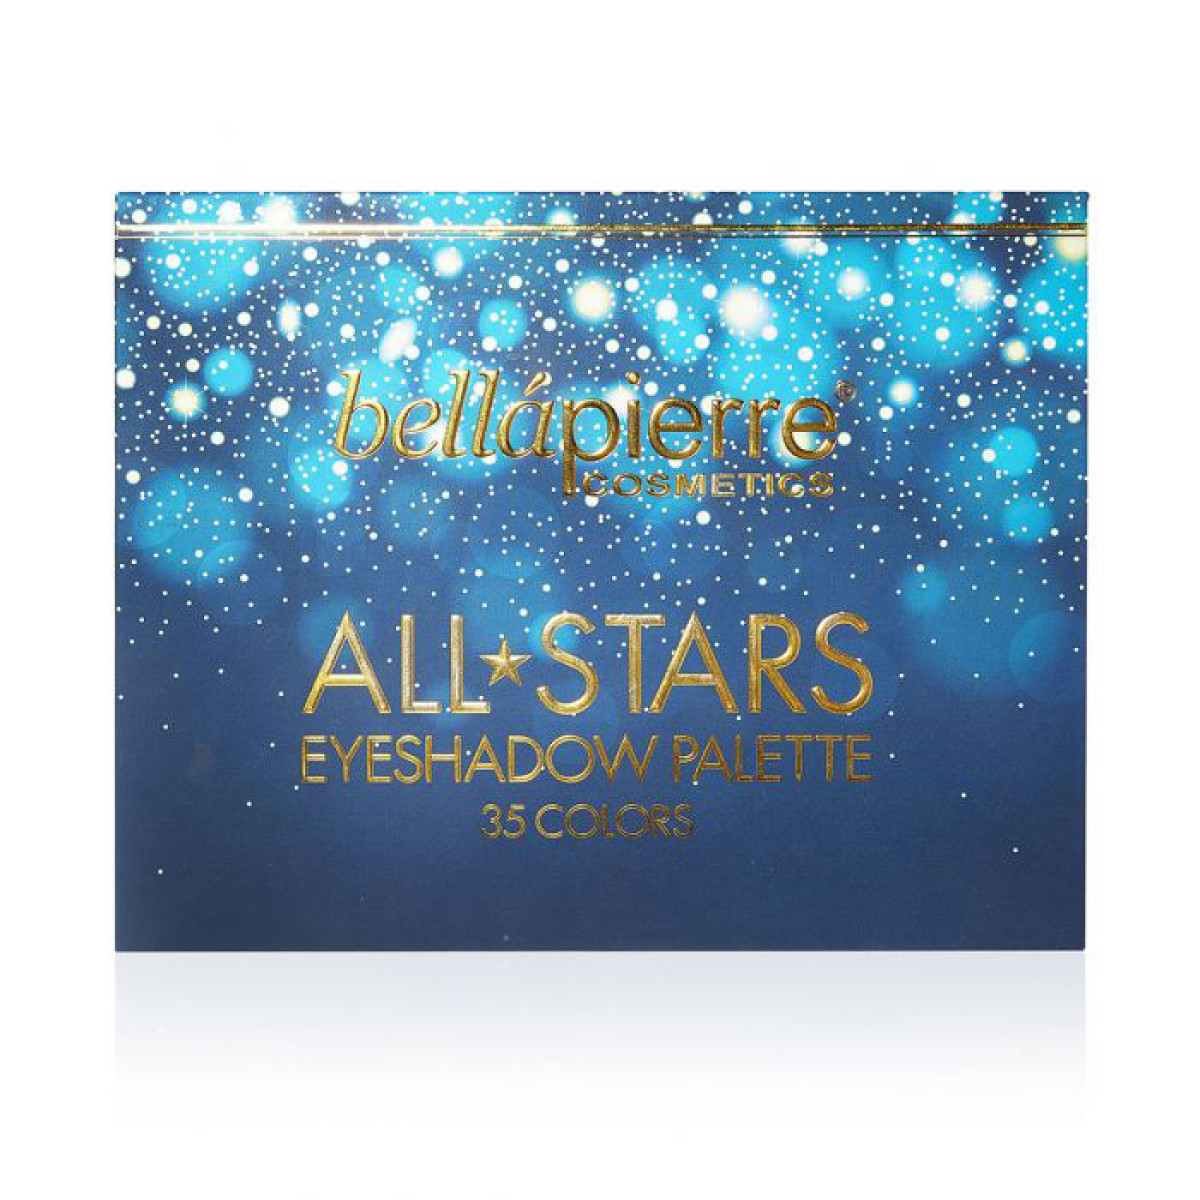 All-Stars Eyeshadow Palette 35 Colors